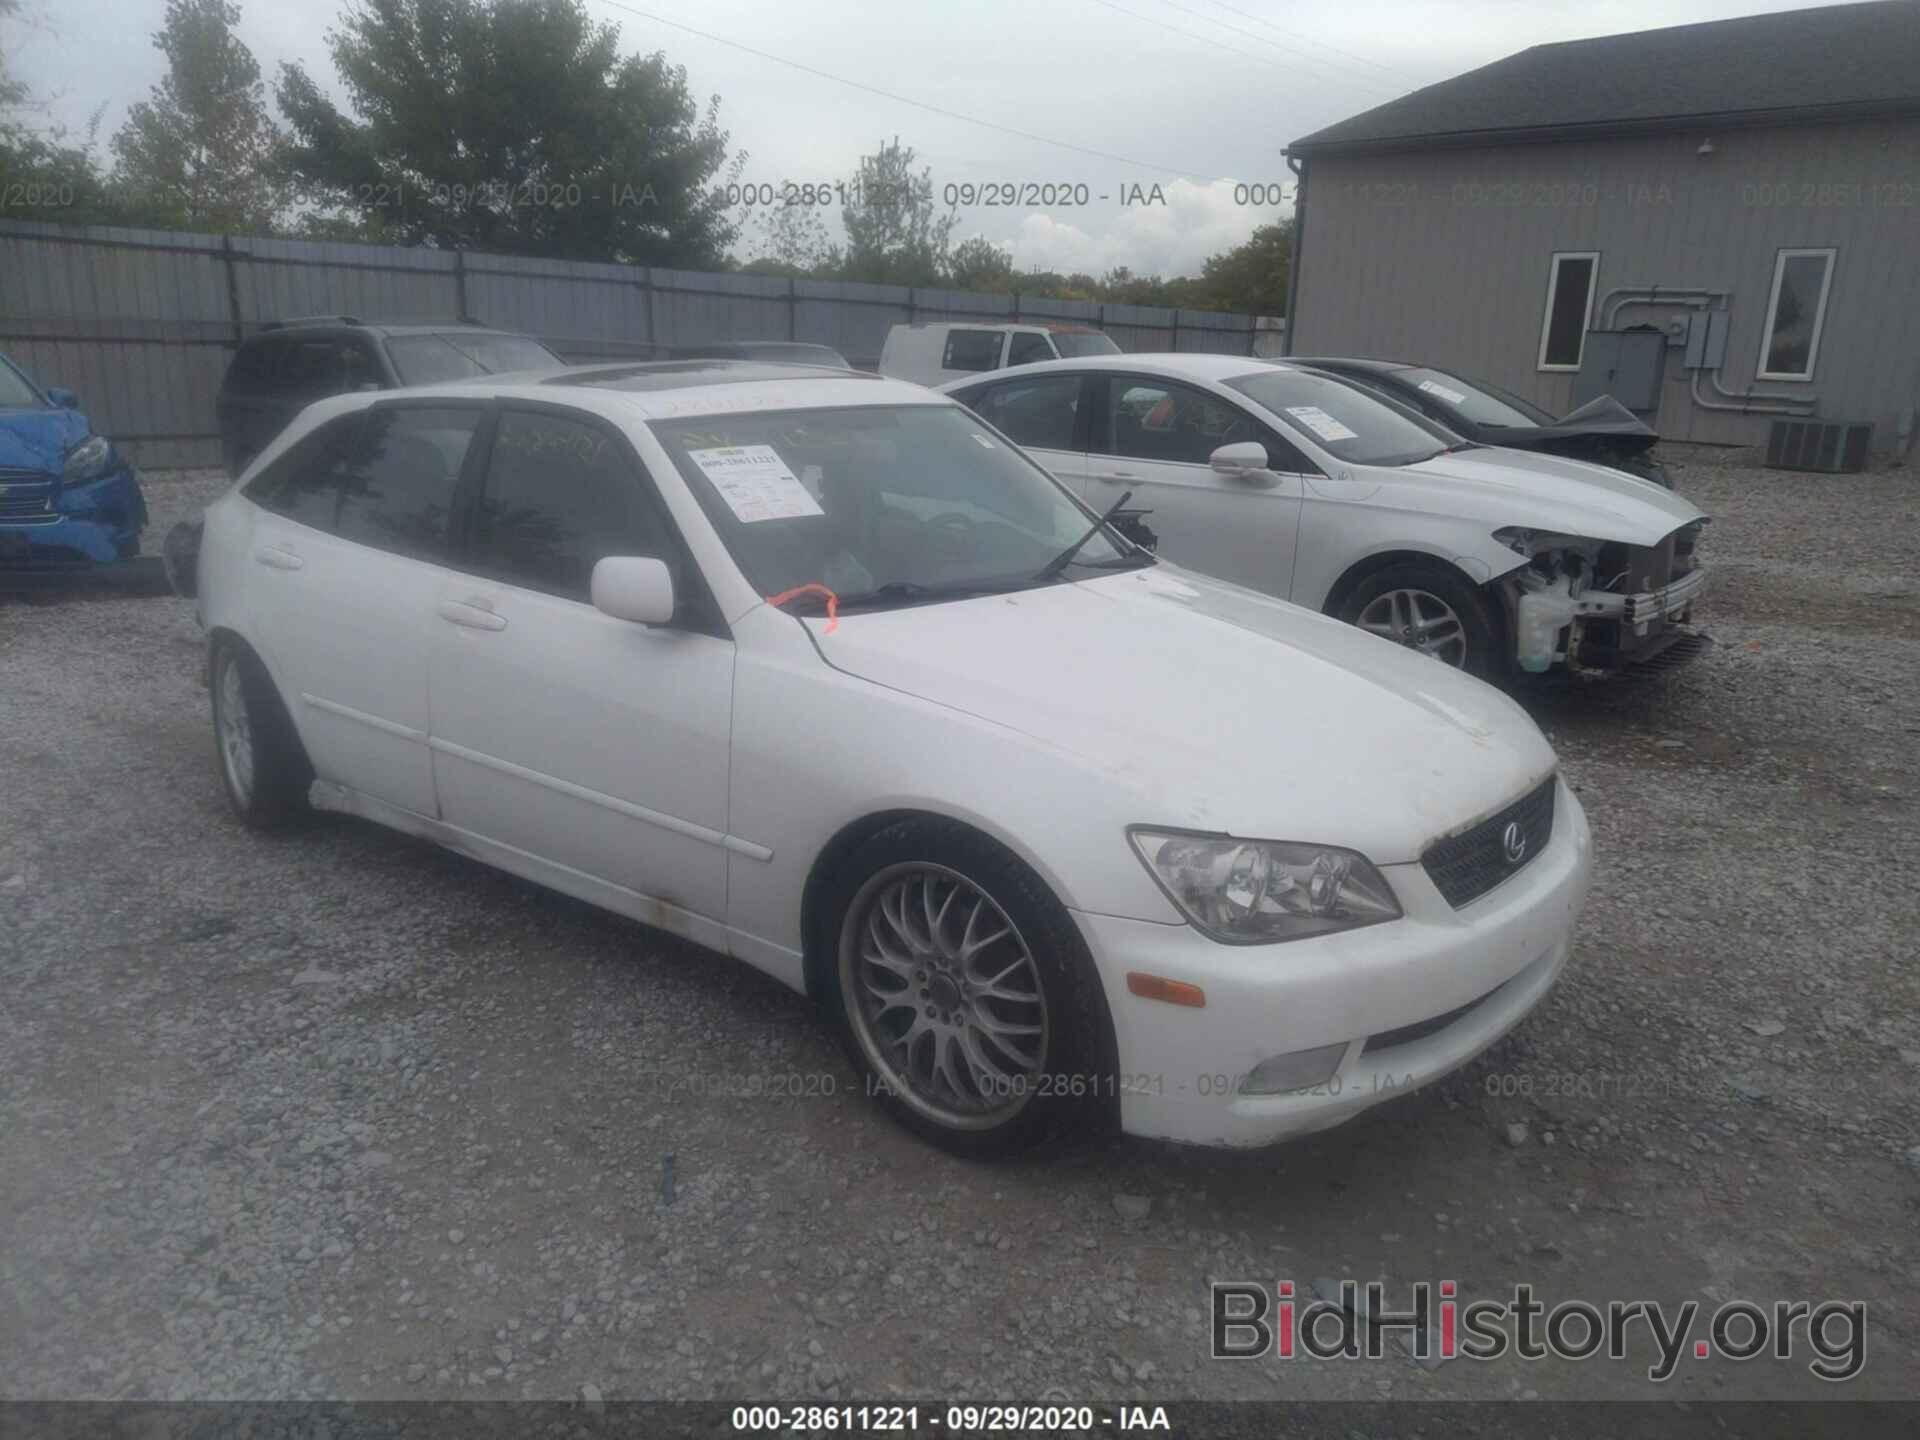 Photo JTHED192920039448 - LEXUS IS 300 2002